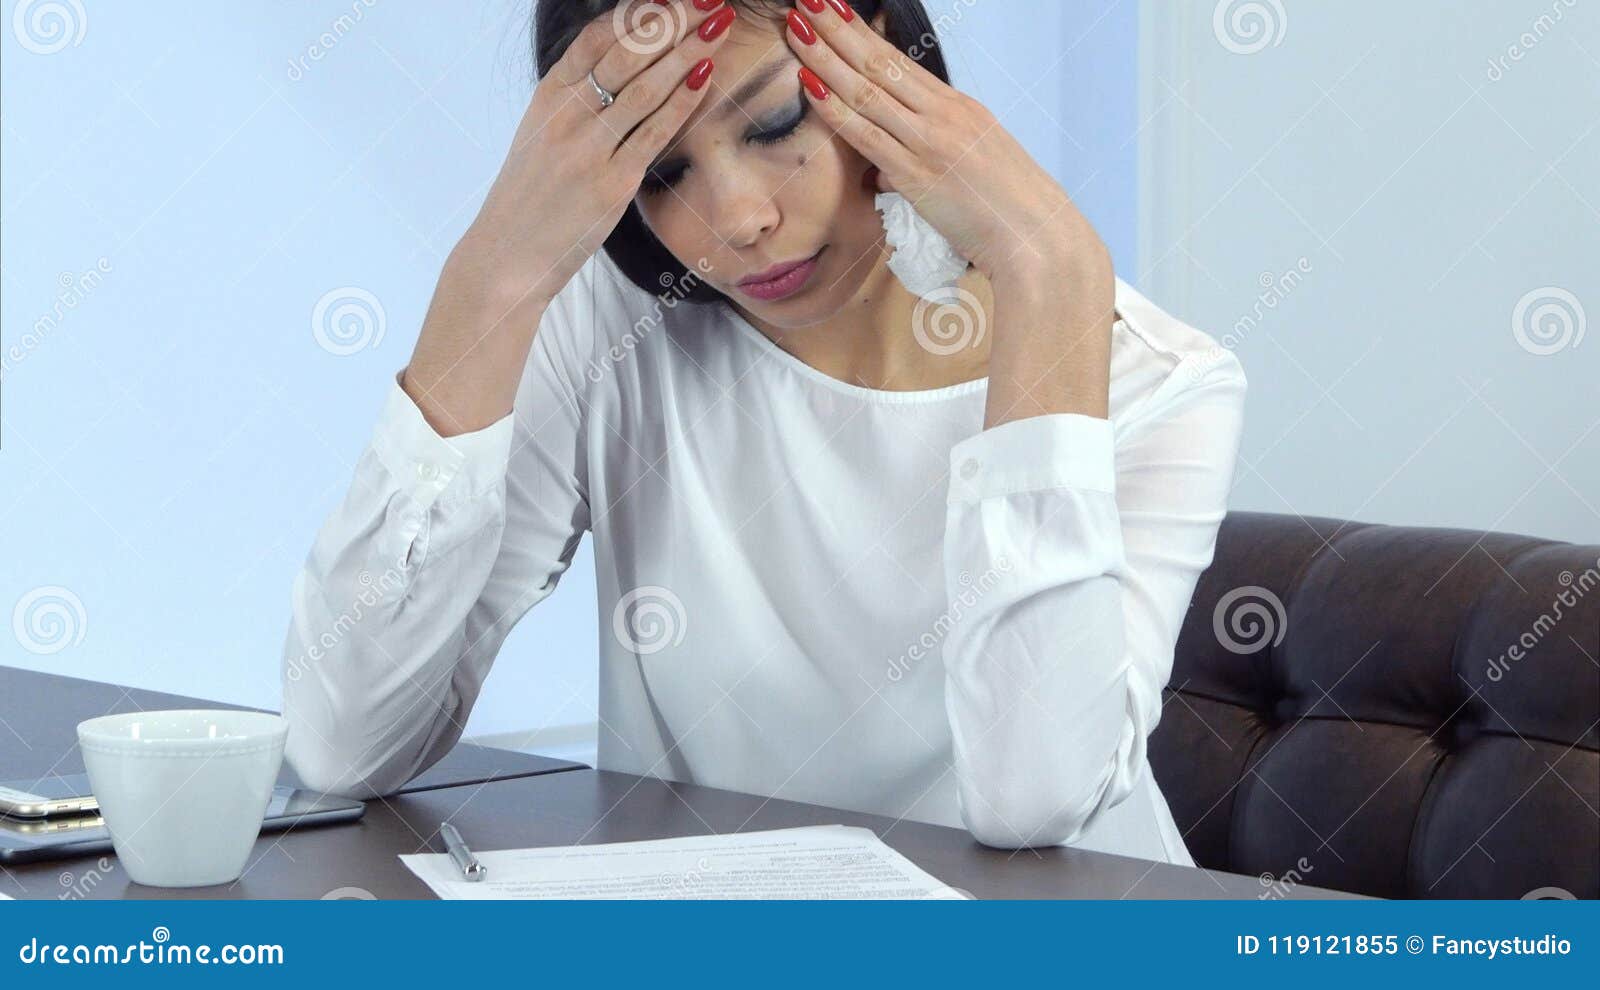 young busy woman feeling not well but continuing signing papers